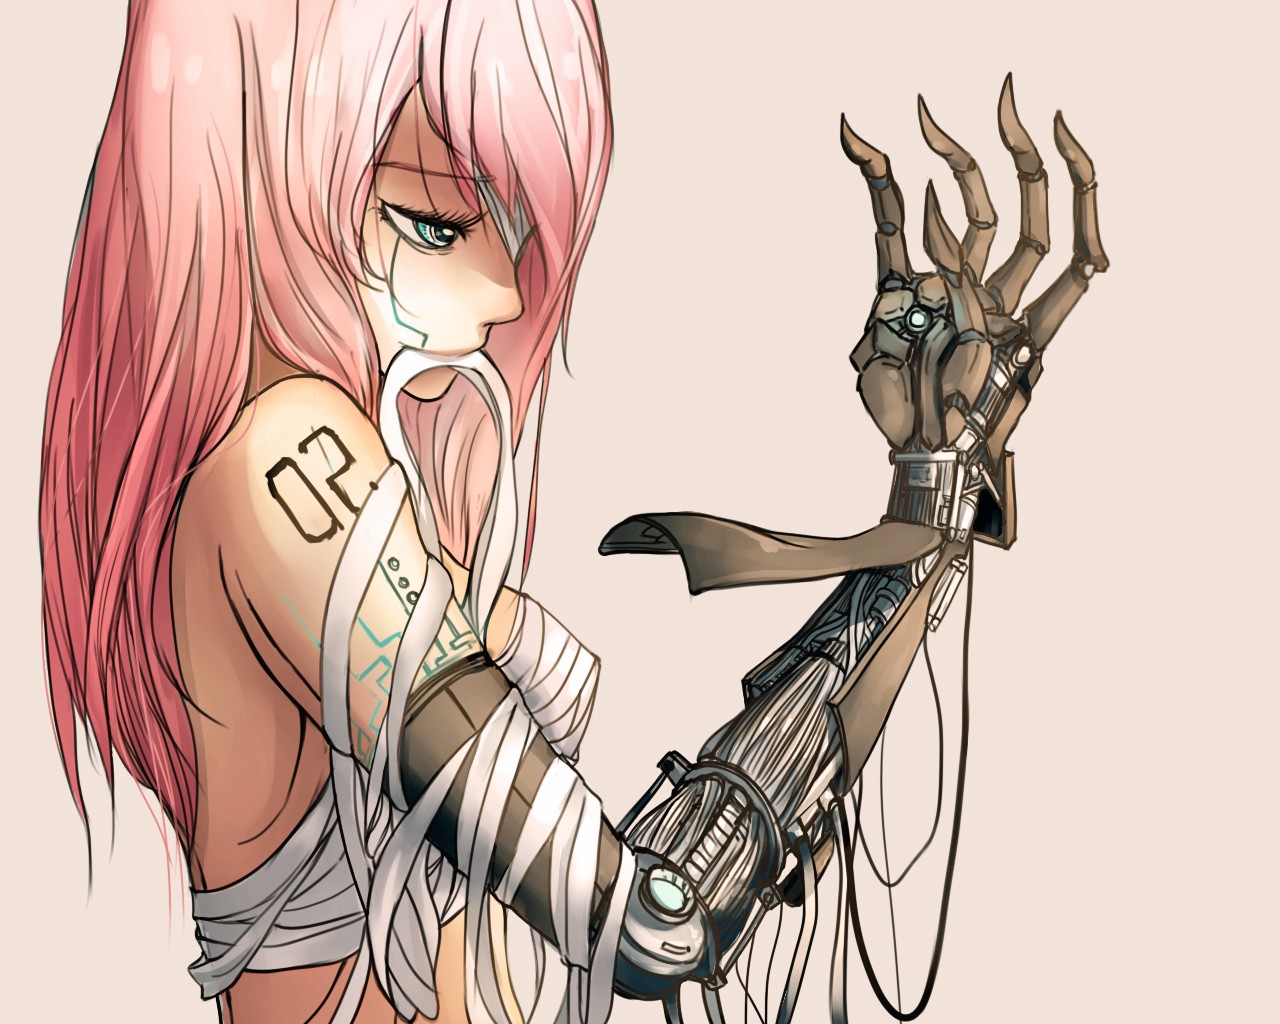 Anime 1280x1024 anime Vocaloid Megurine Luka anime girls science fiction science fiction women pink hair long hair machine women cyborg wrapped bandages